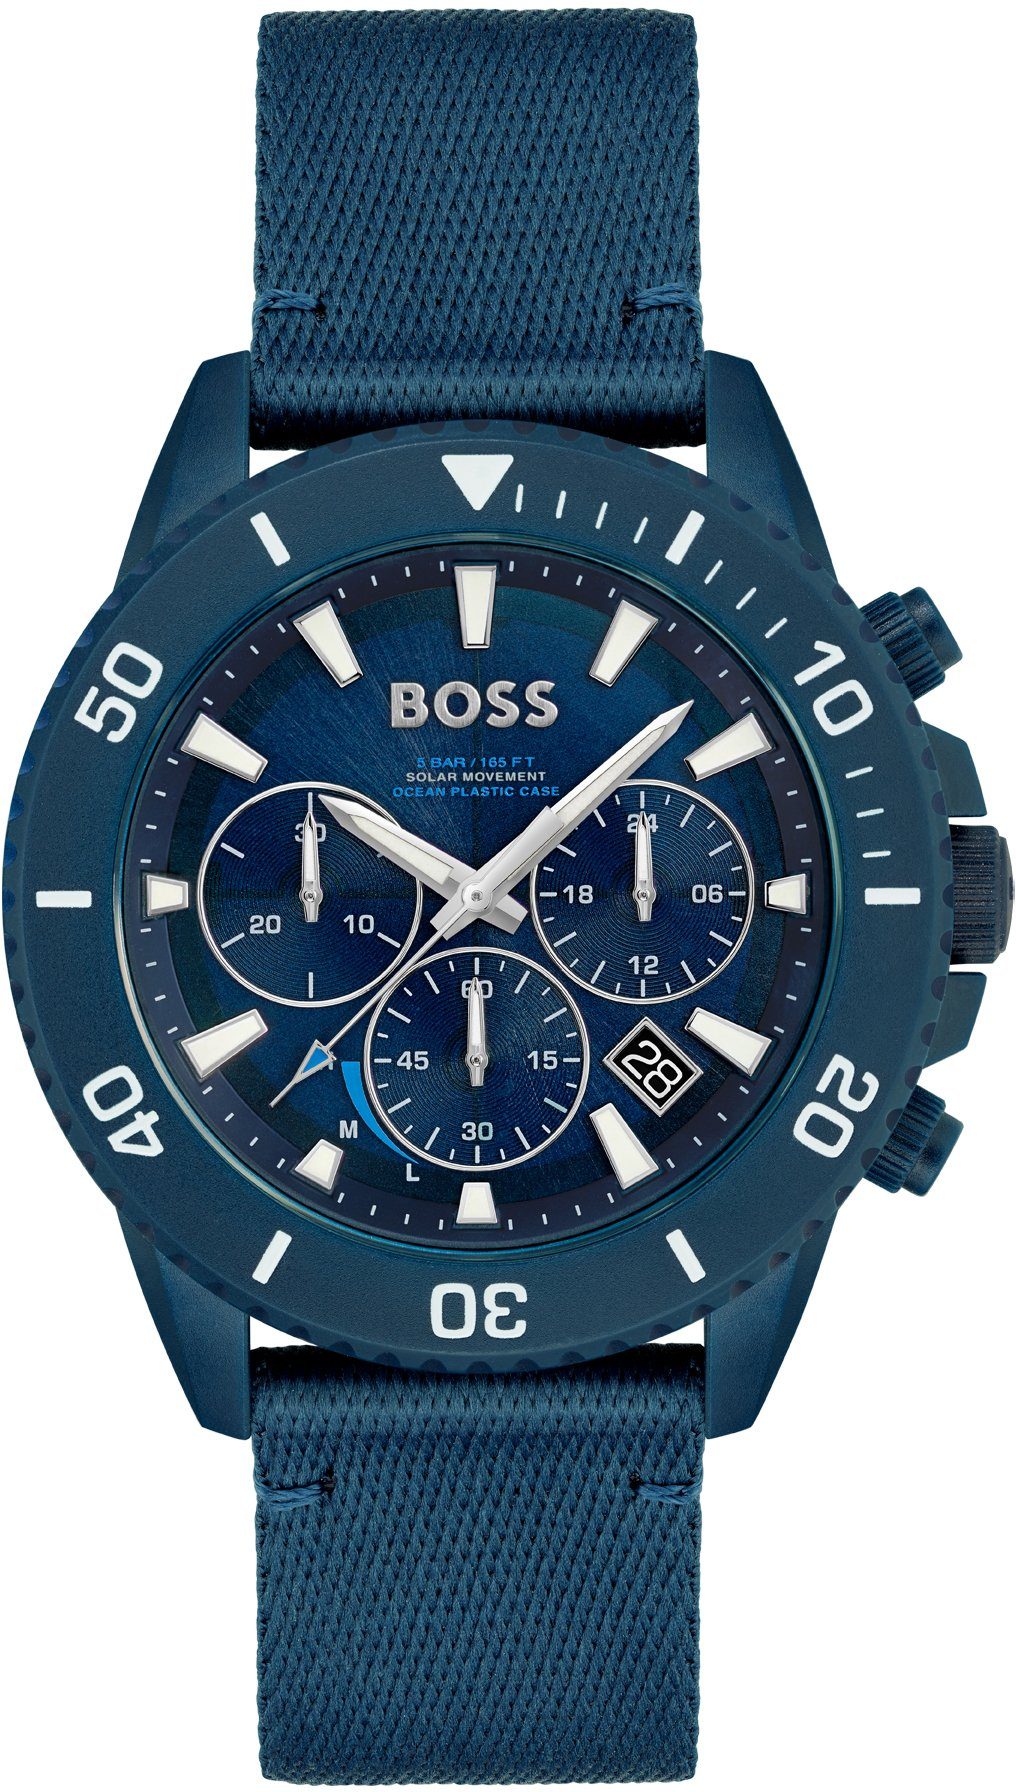 BOSS Chronograph Sustainable 1513919 #tide, Admiral